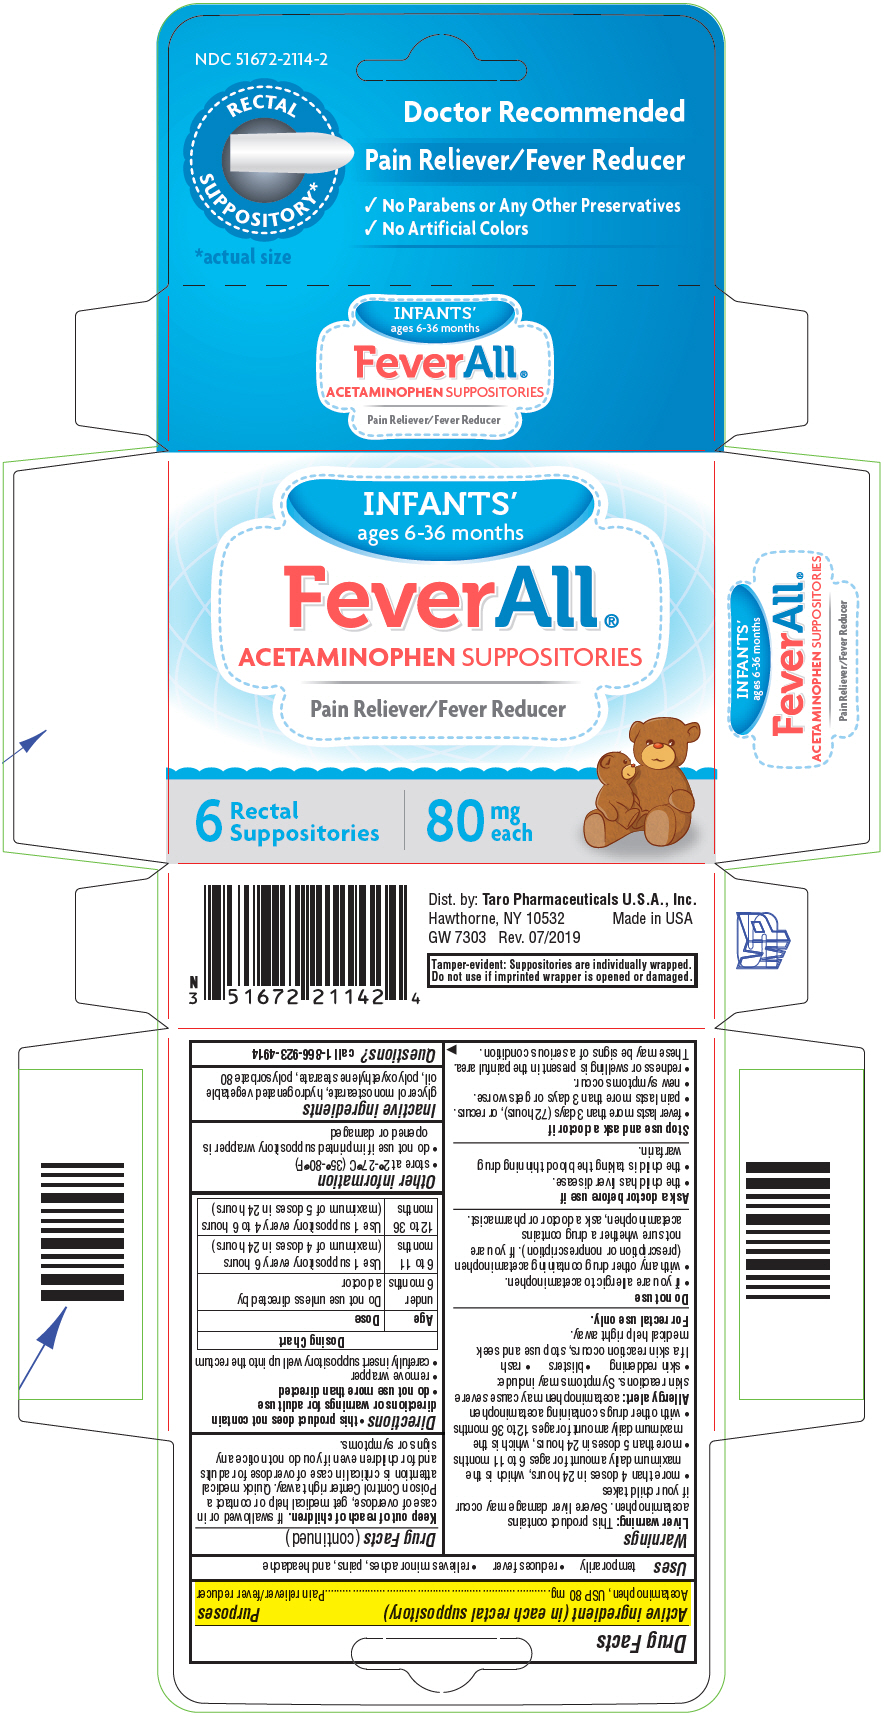 Feverall Infants | Acetaminophen Suppository while Breastfeeding